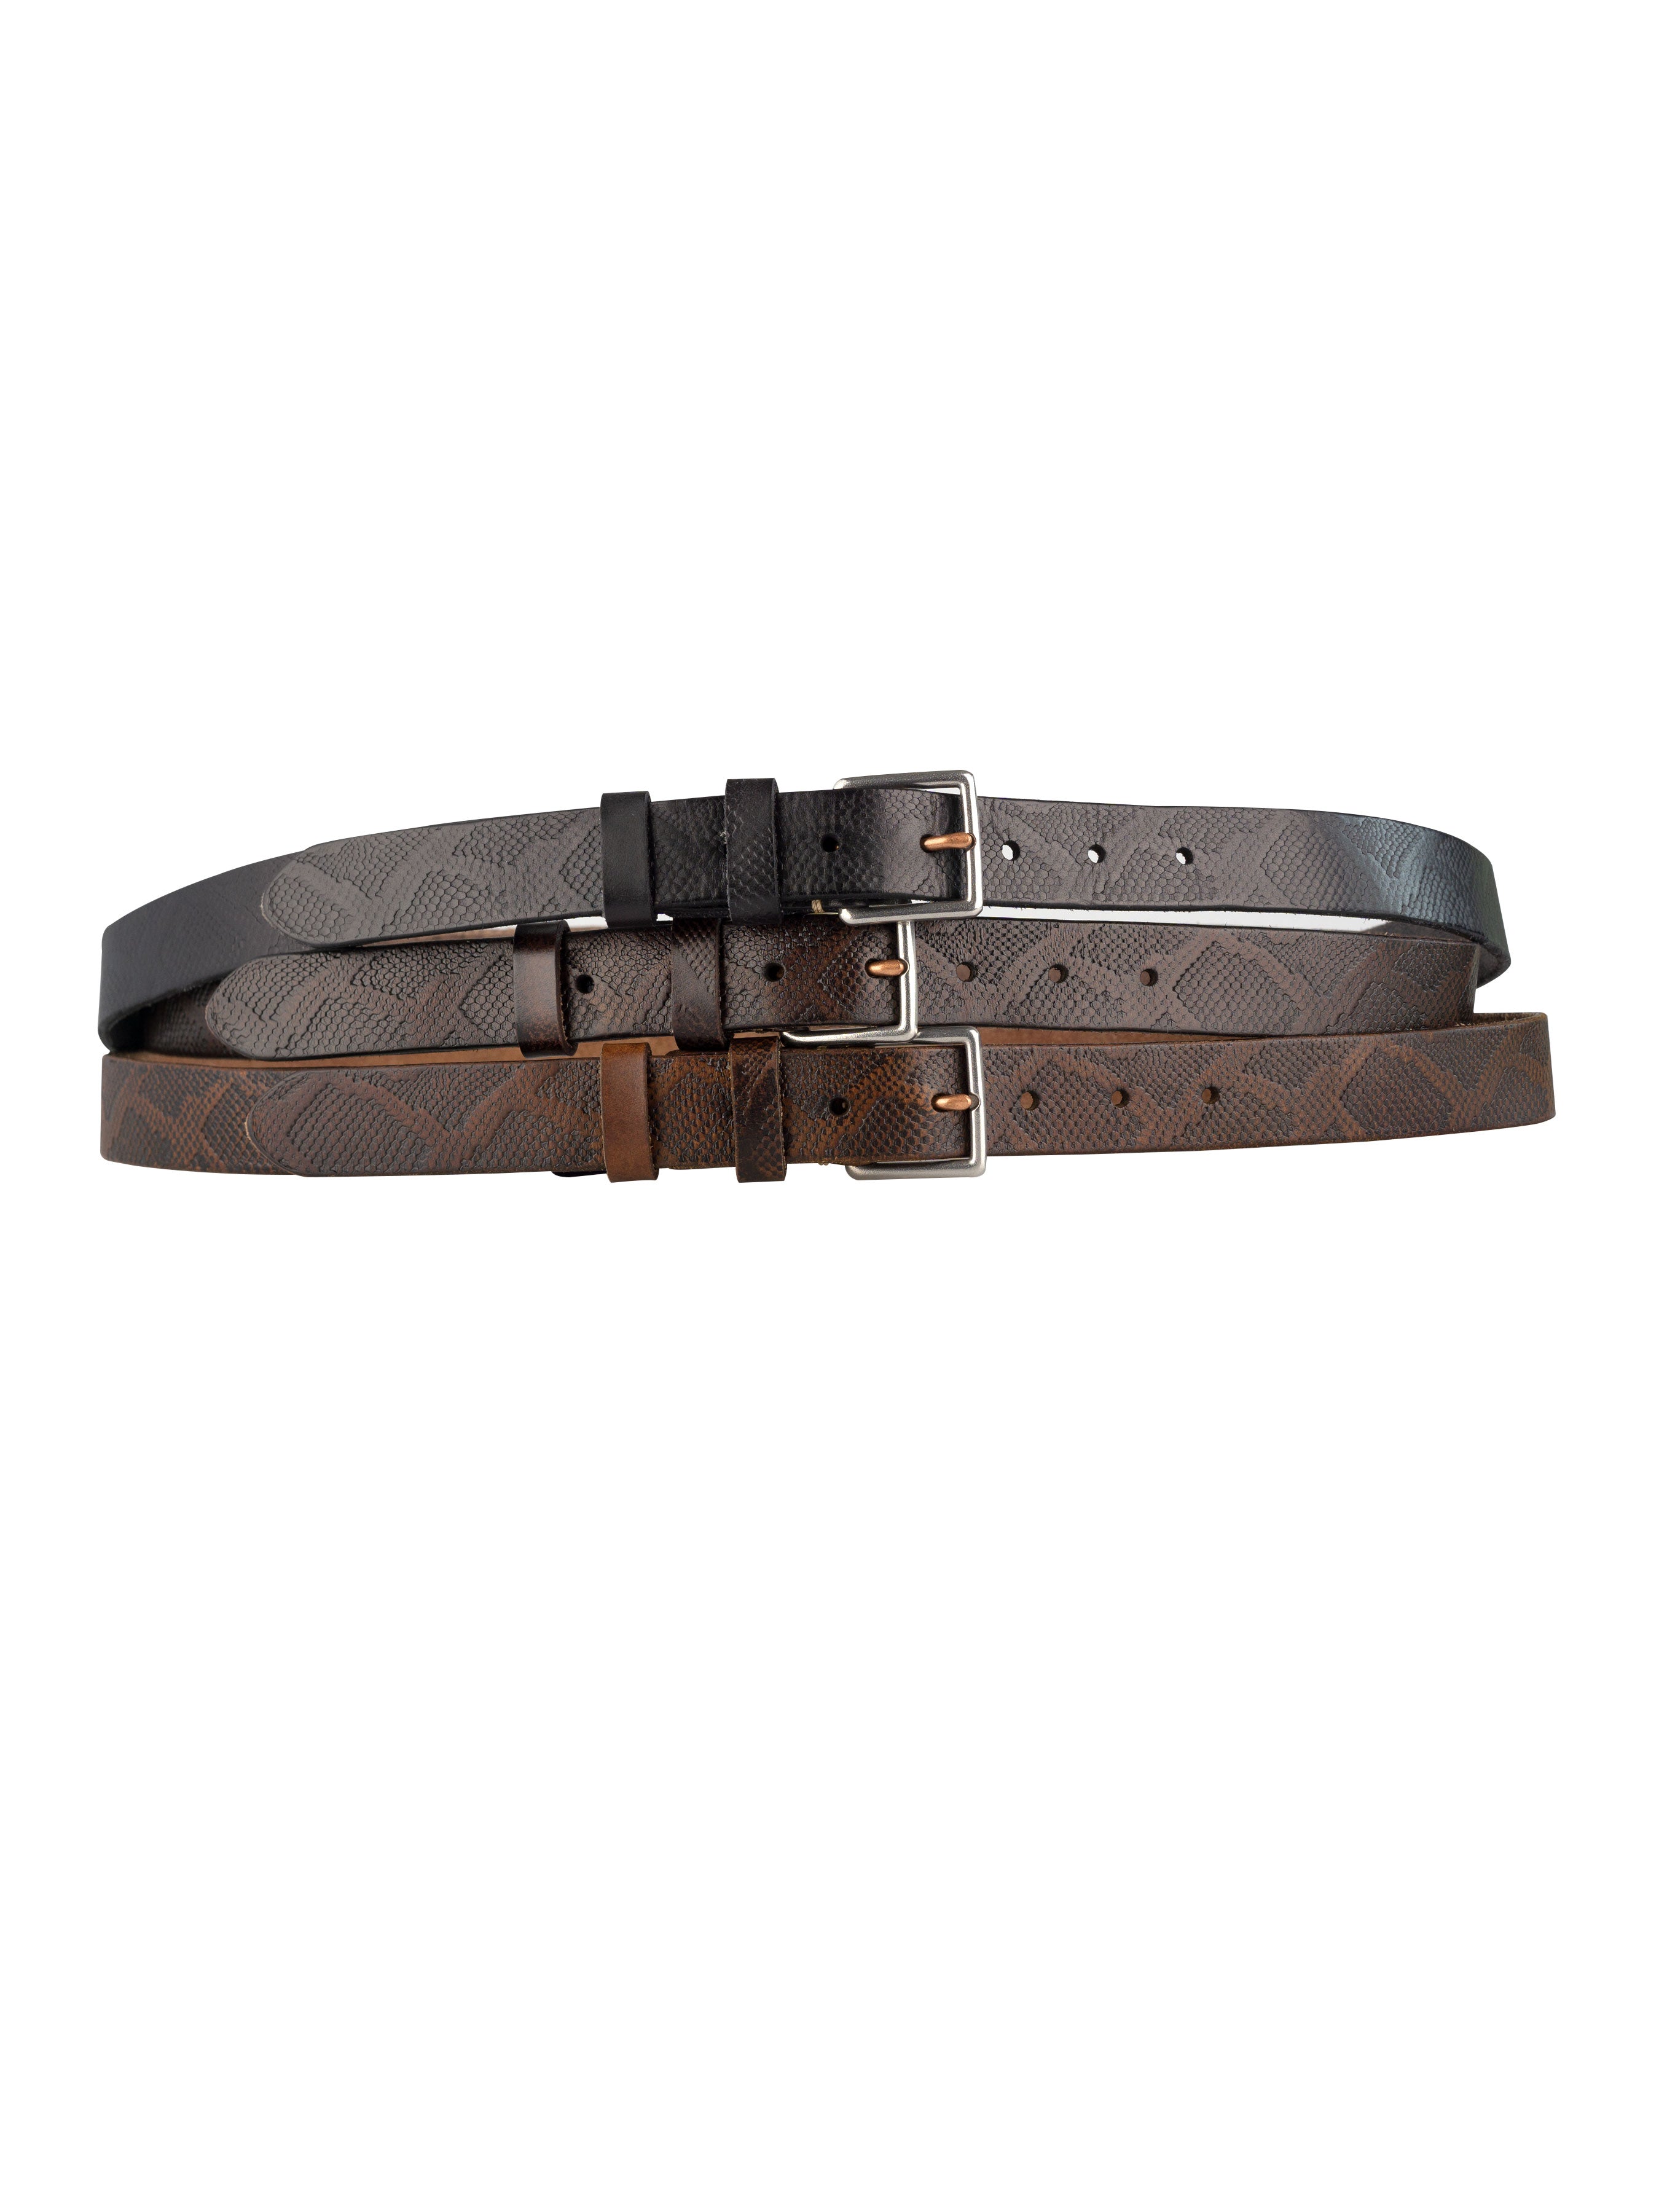 Rustic Phyton Leather Belt with Palladium-toned Buckle - Zeve Shoes